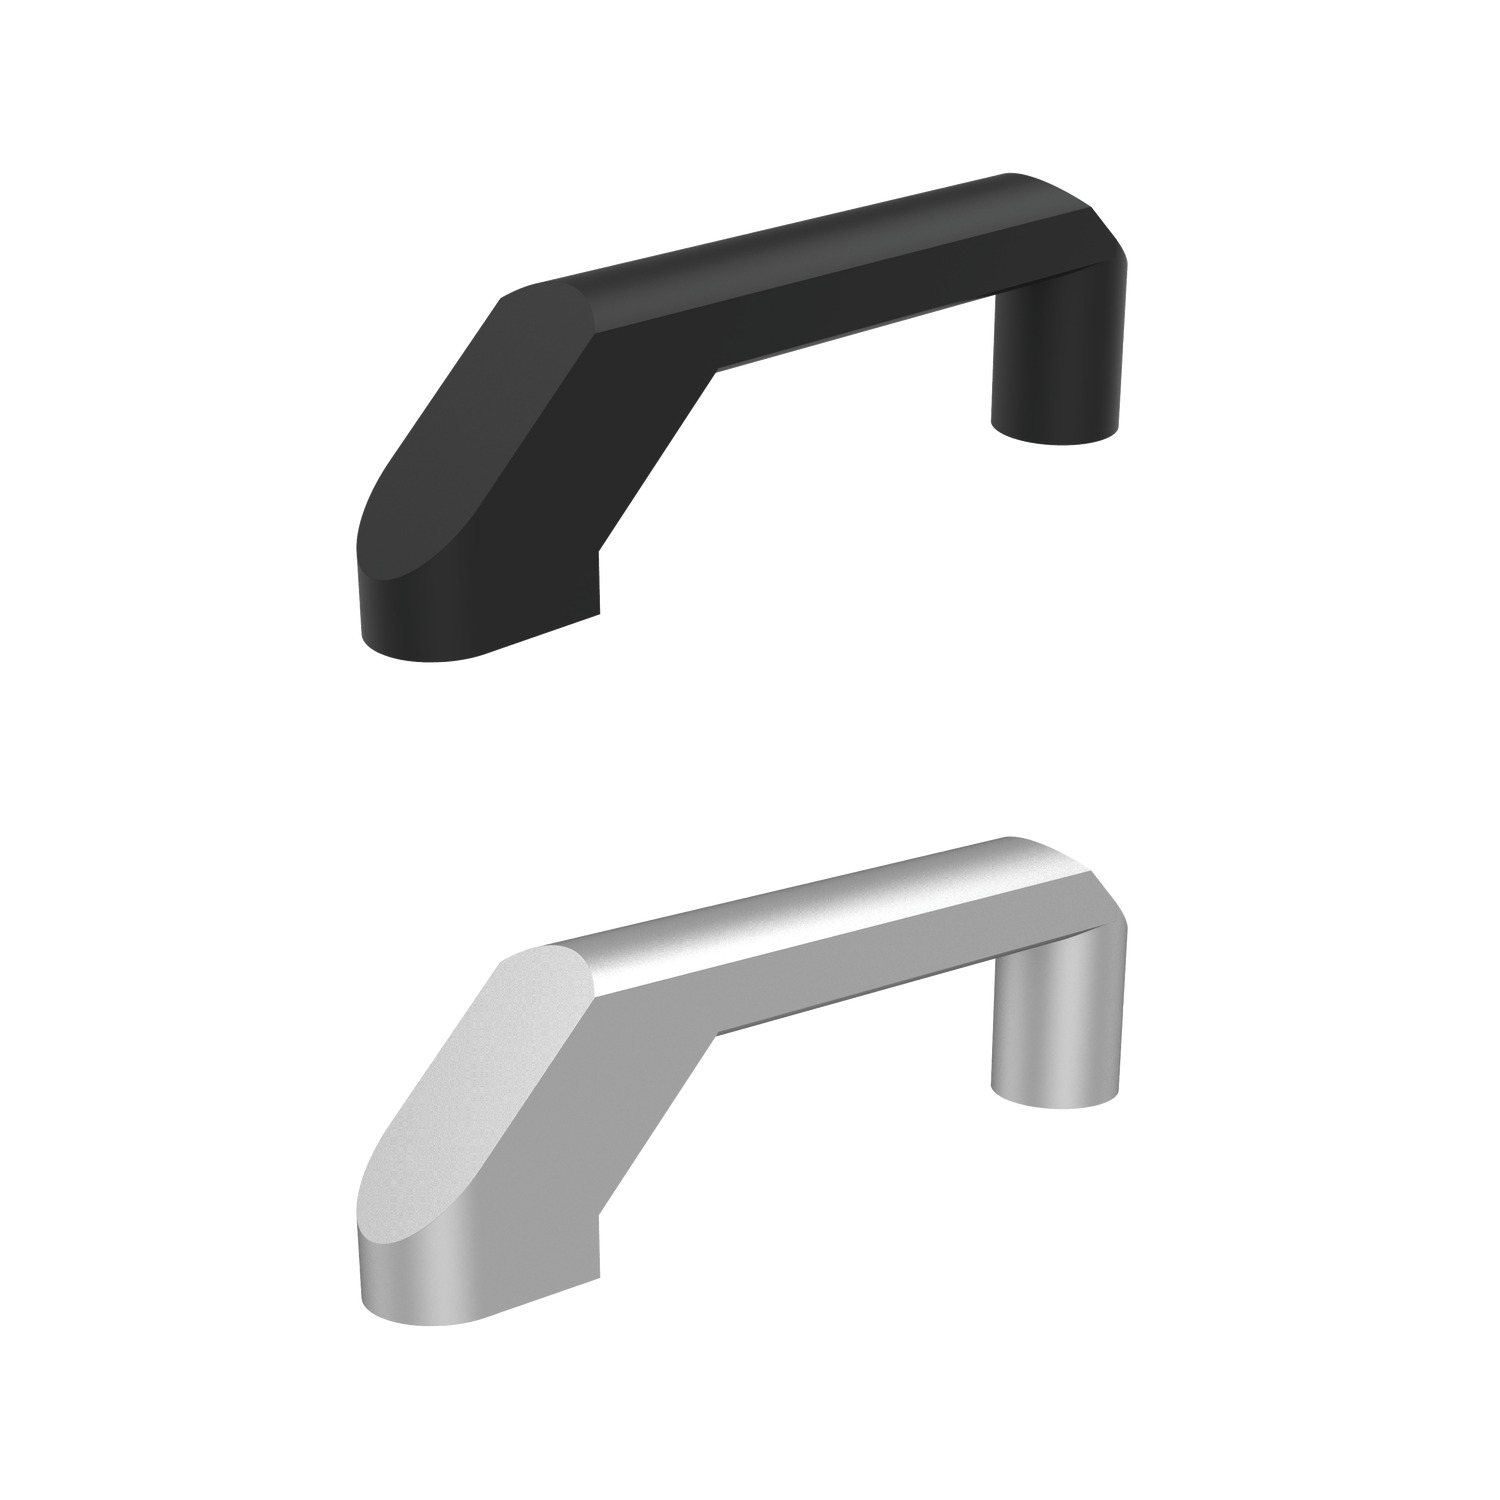 Pull Handles Our 78200 Aluminium pull handles have a Vibrant ground finish, raw or black powder coated. Stress resistance of minimum 500N.